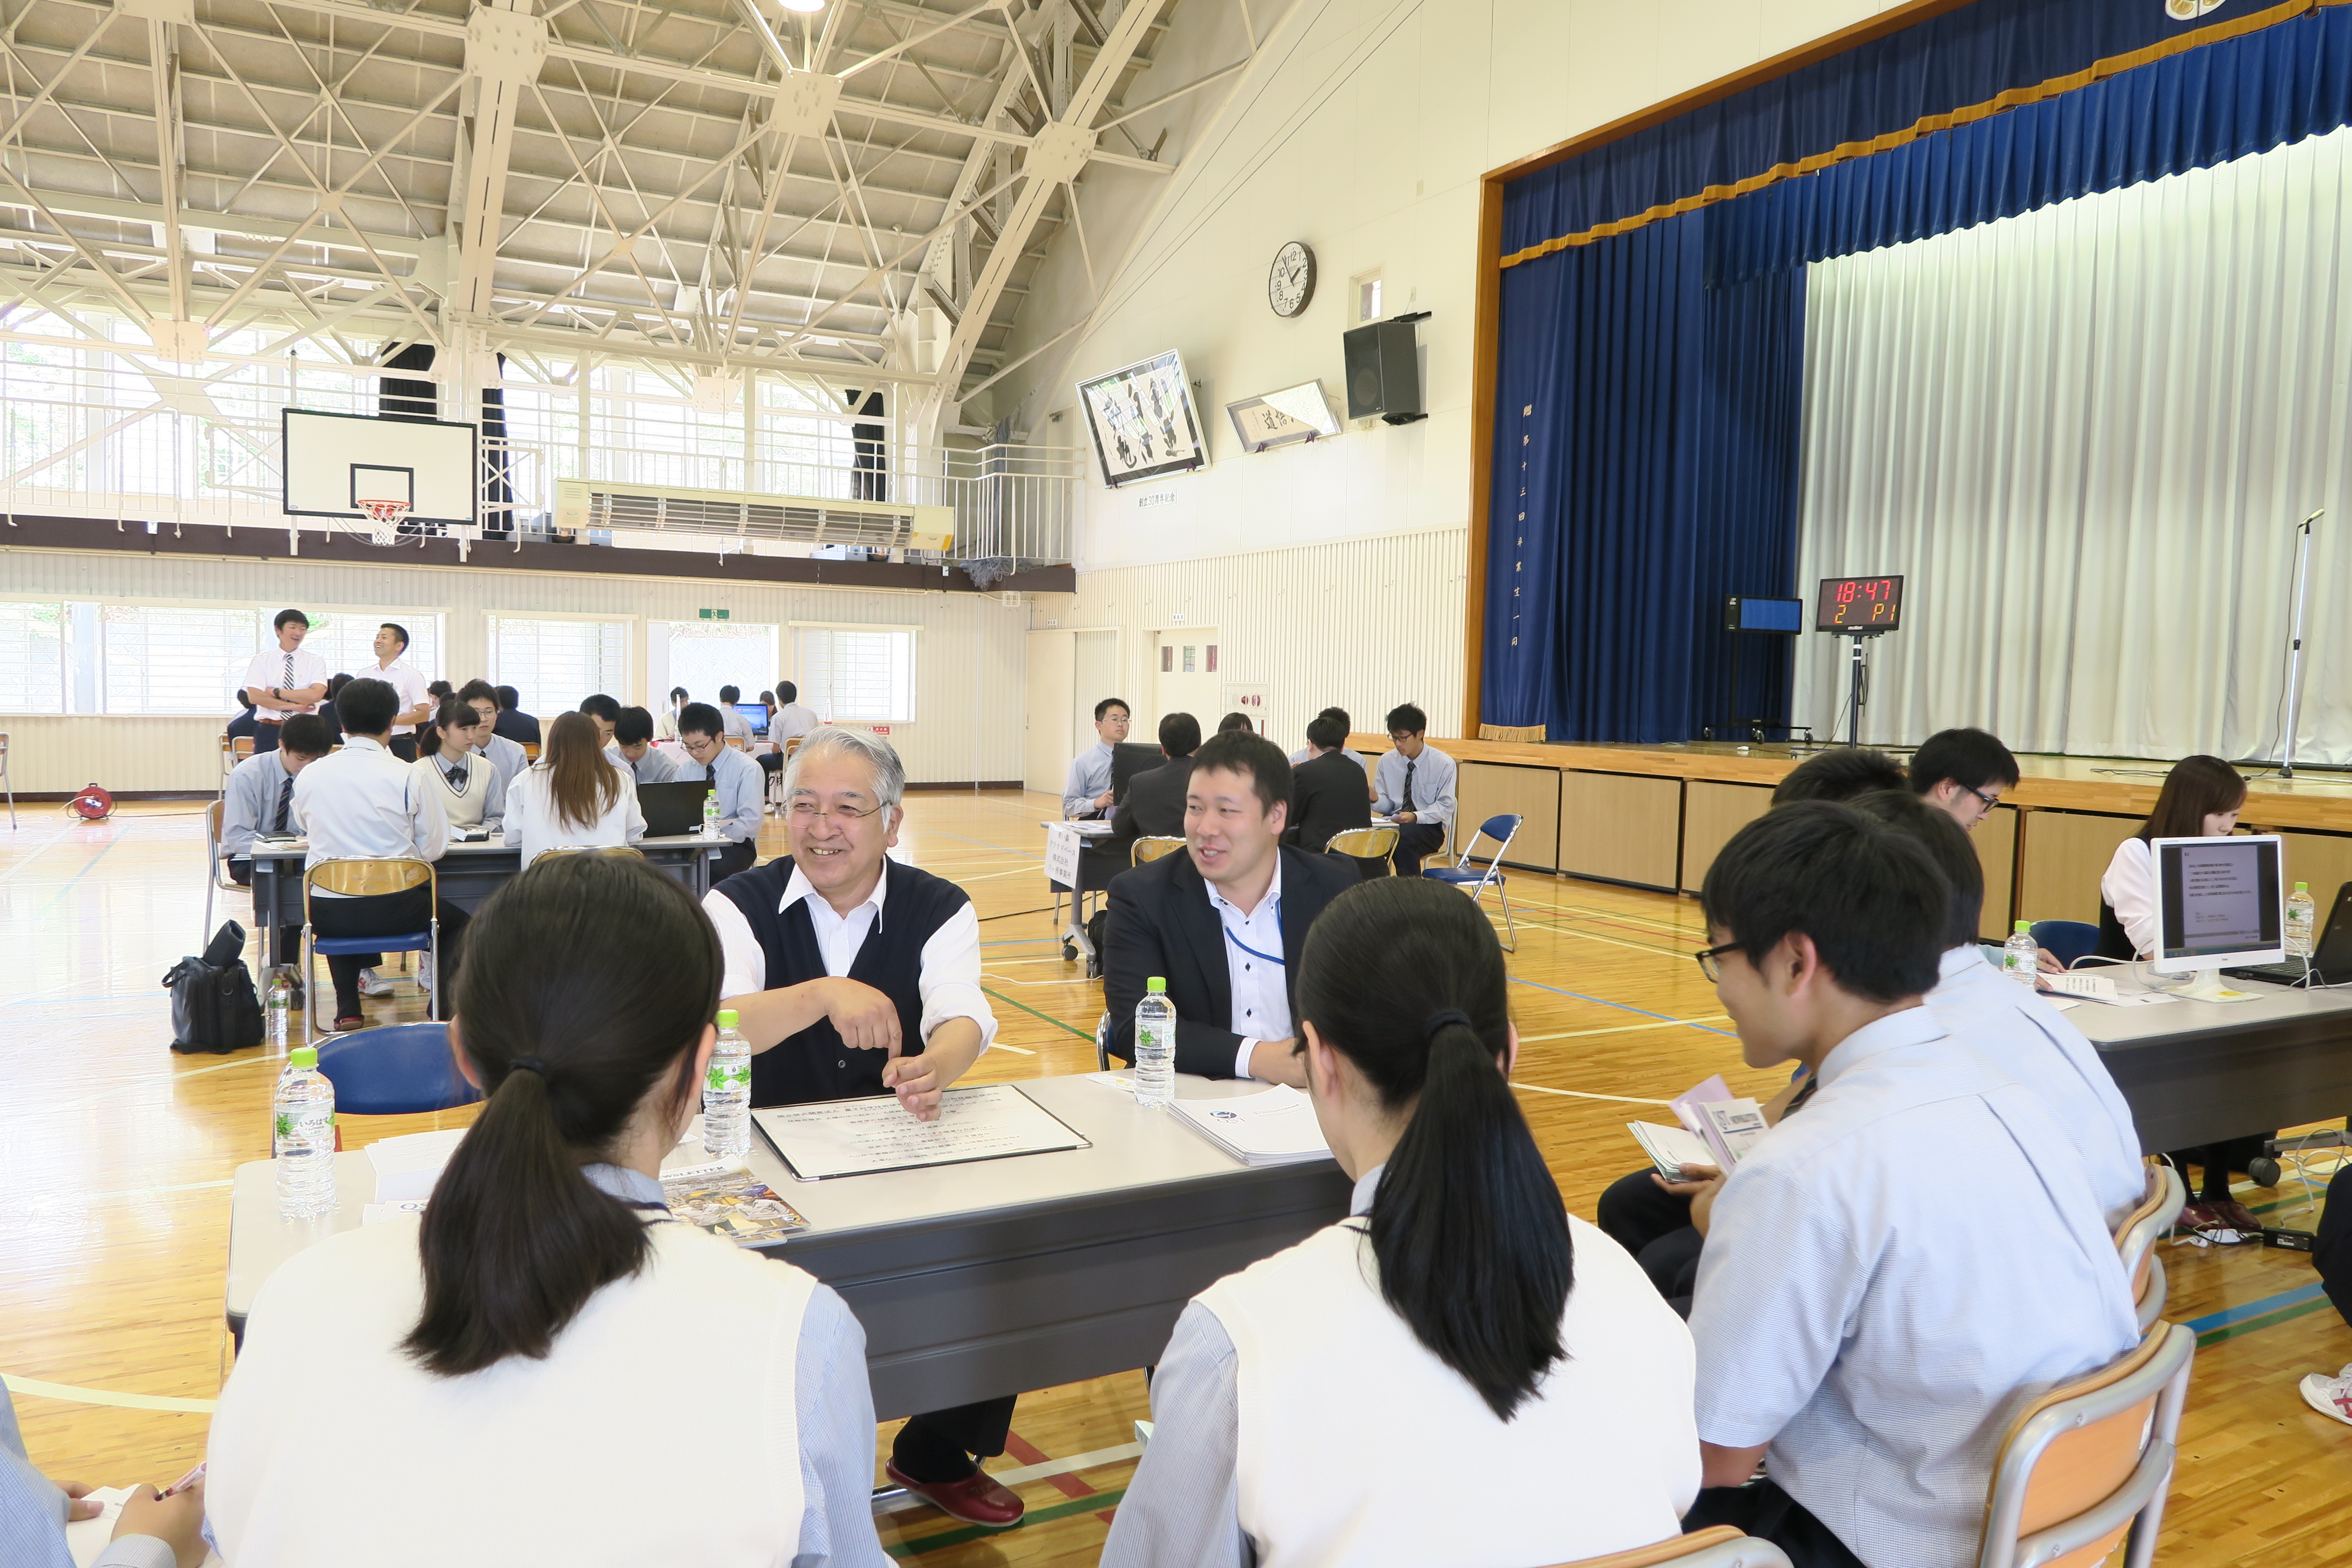 Participated in “The 10th business workshop in the village” at Rokkasho High School in 2017の画像